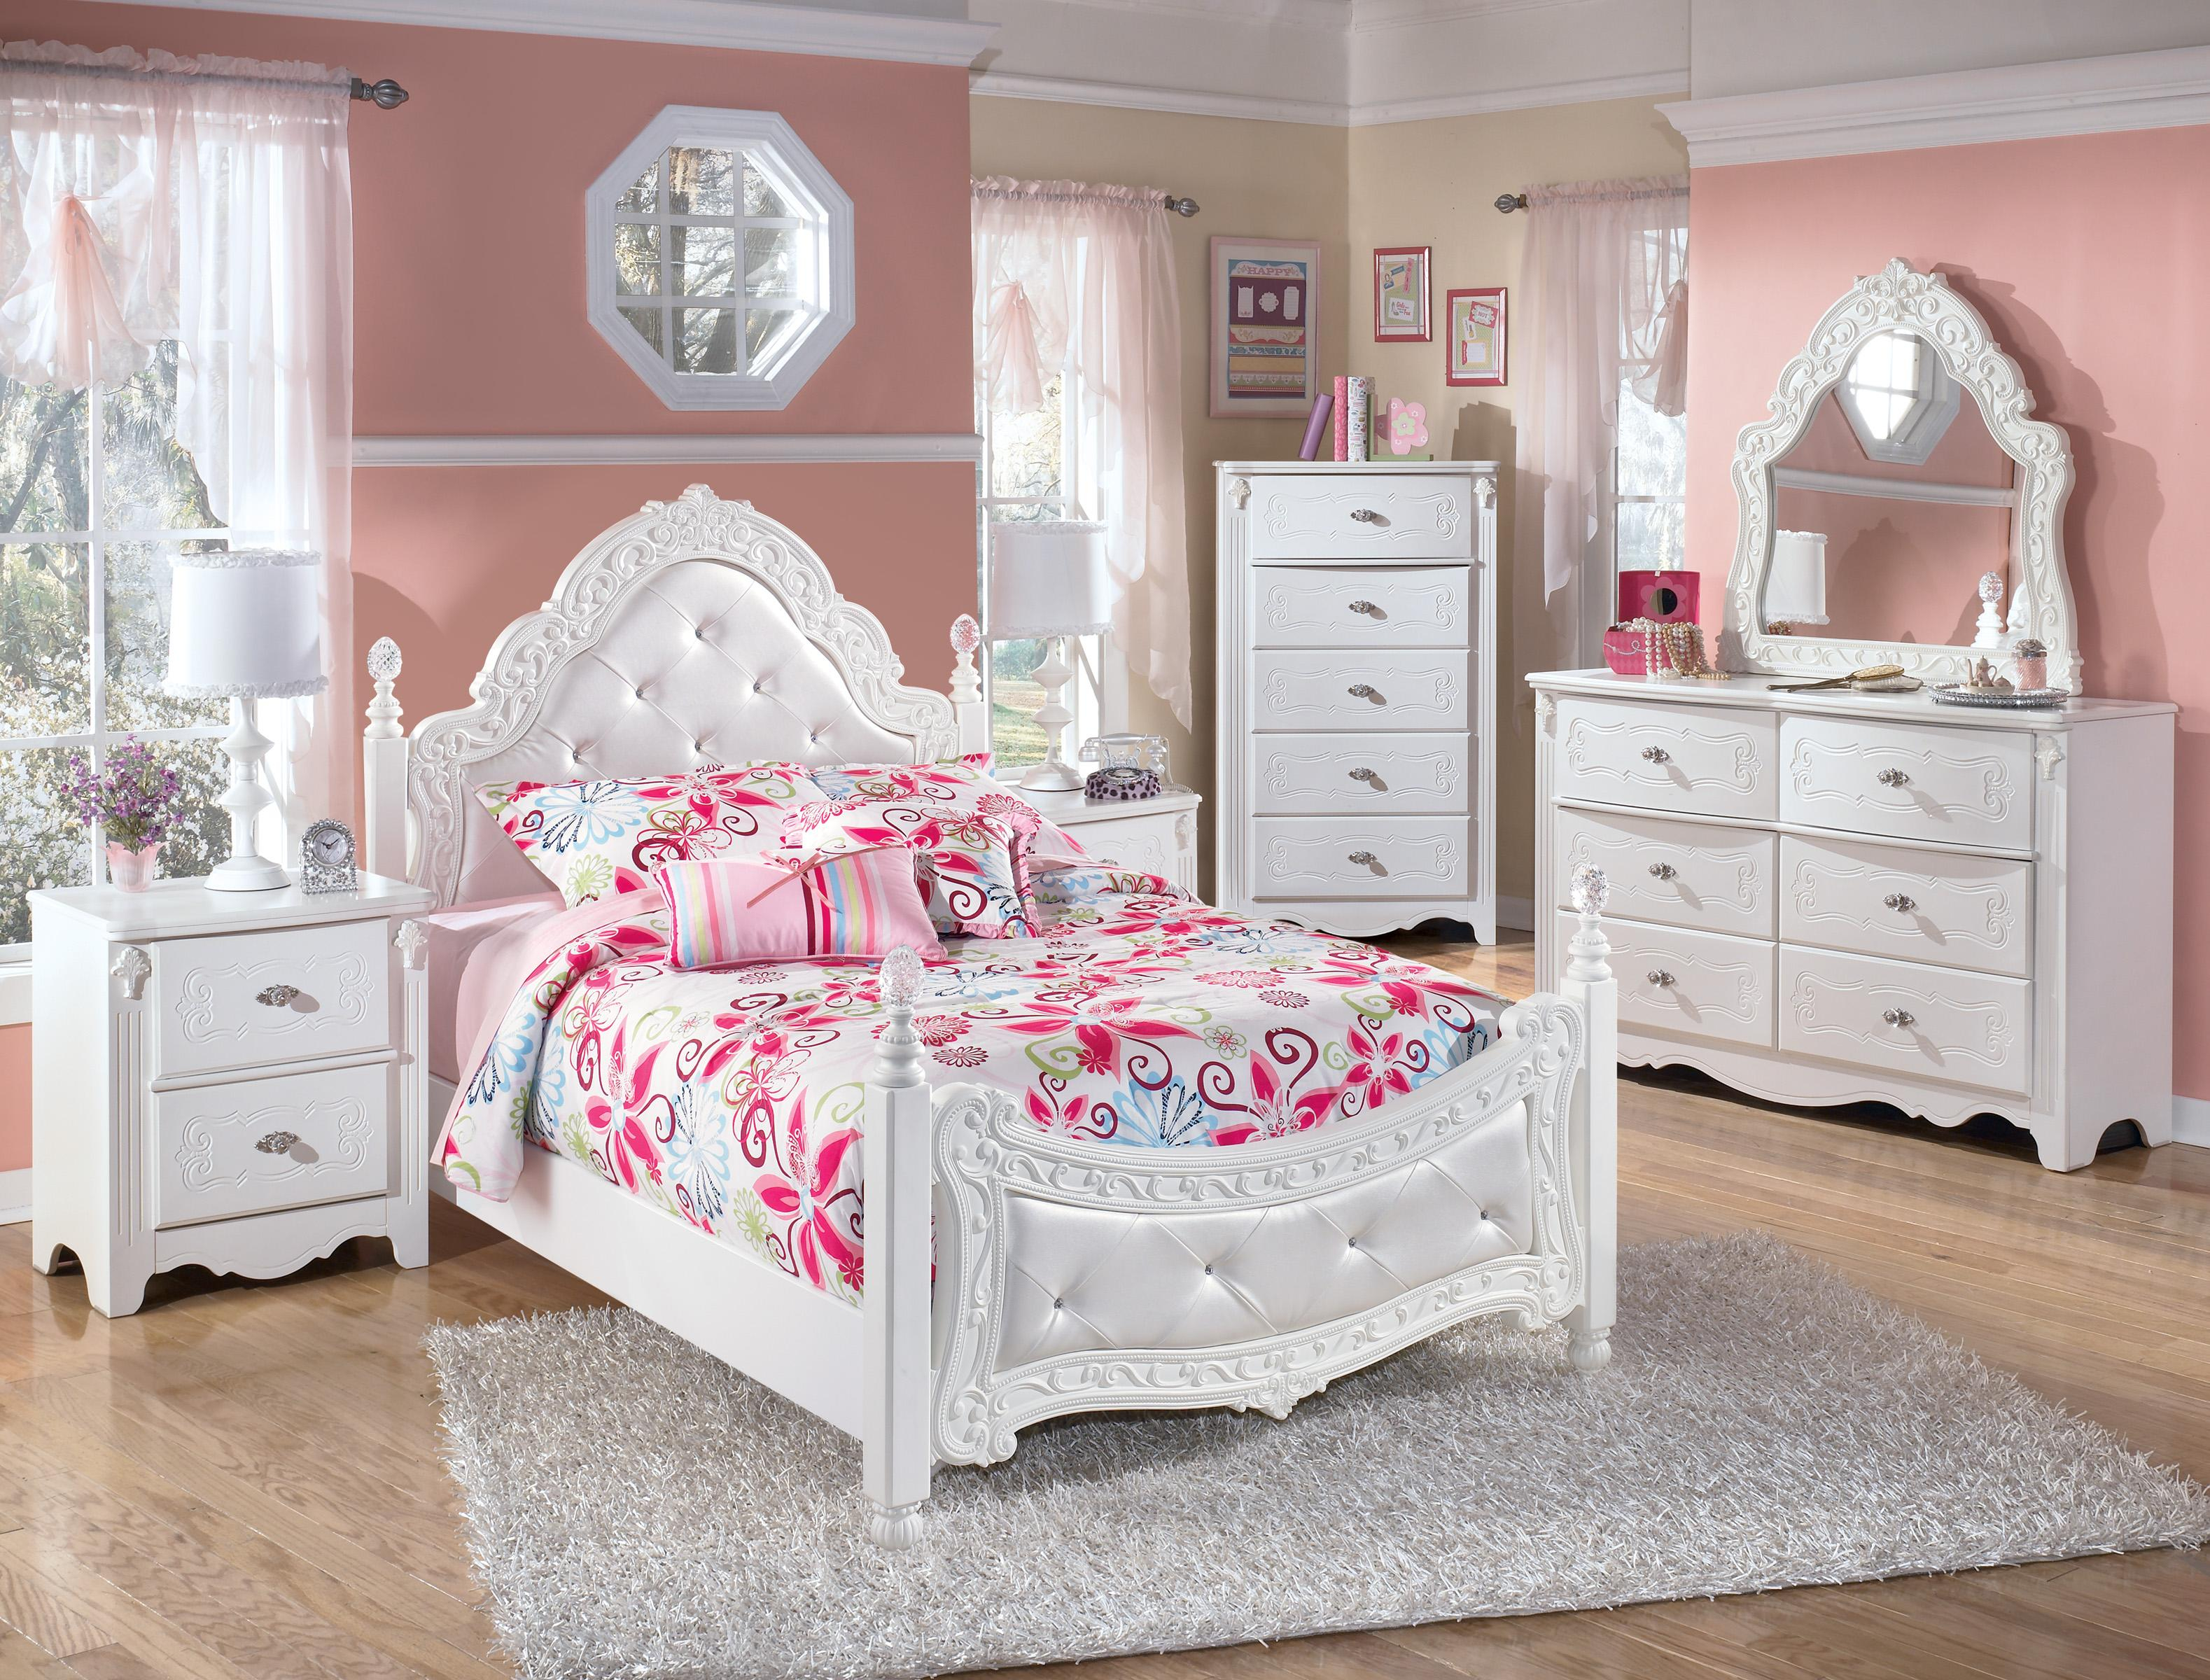 Bedroom Girls Princess Twin Bed Toddler Bed Furniture Little Girls with dimensions 3157 X 2400